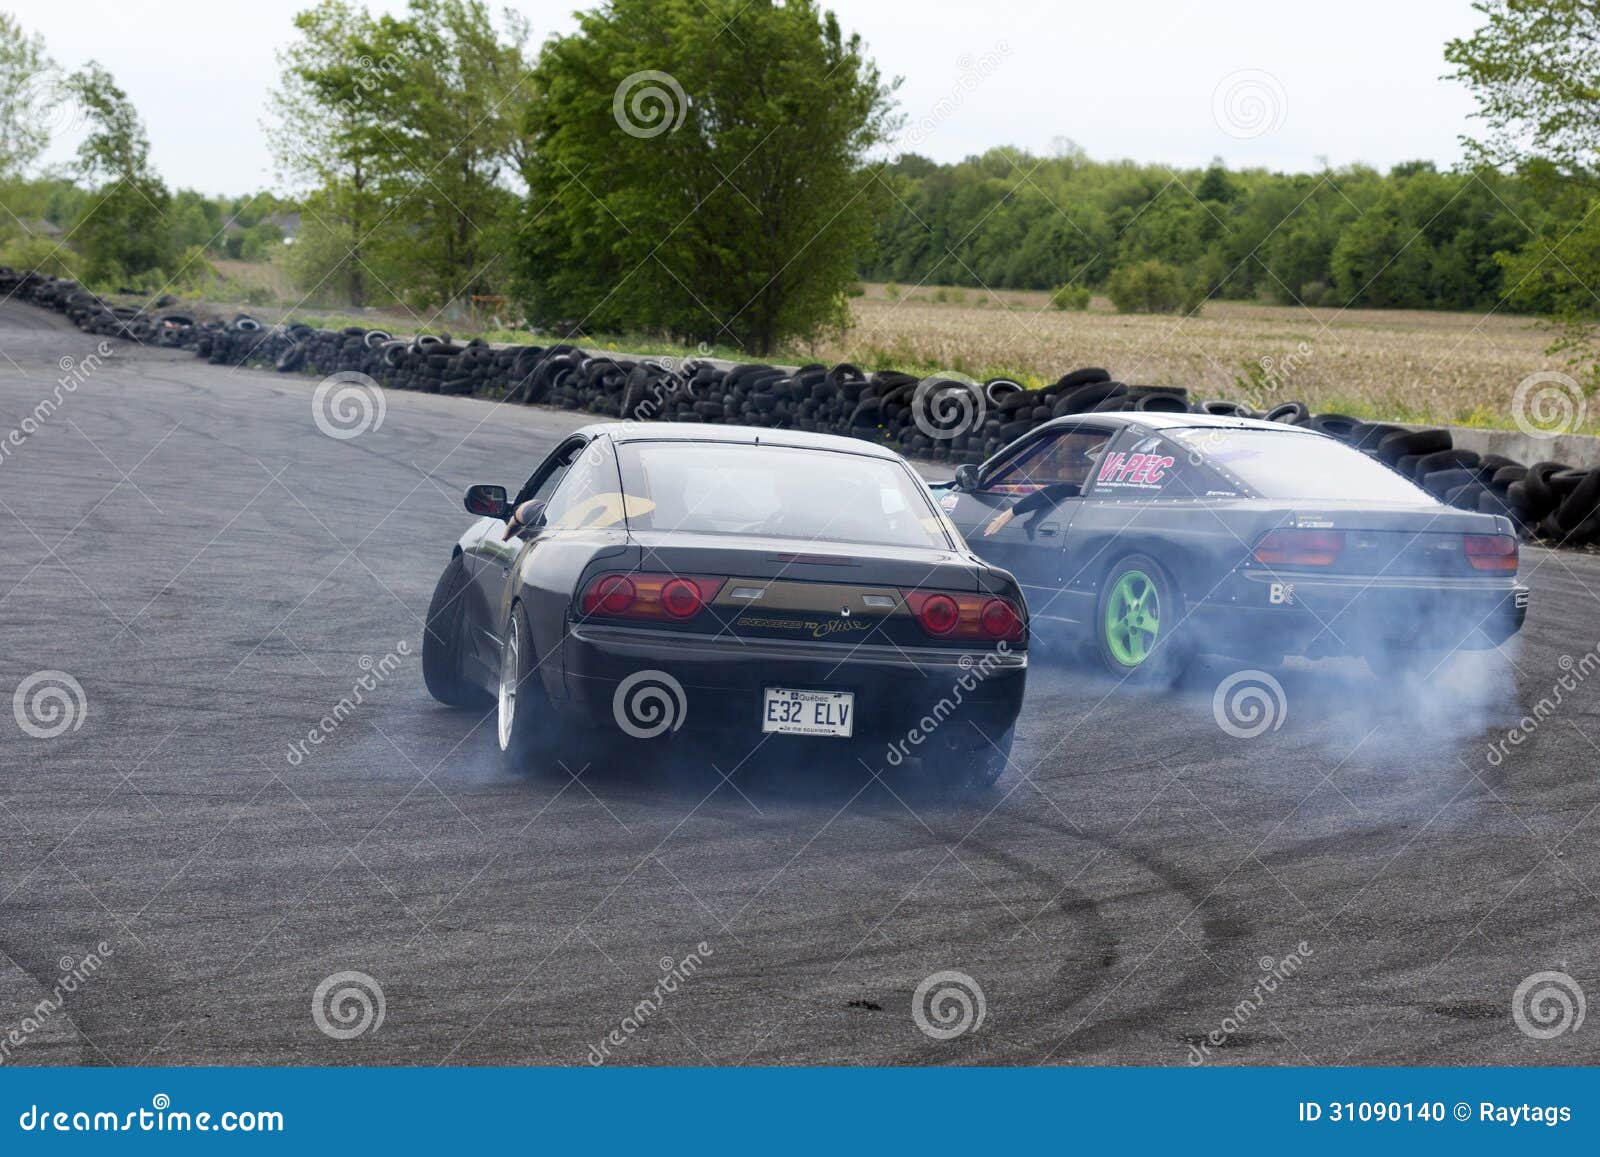 Drifting Car Images – Browse 5,639 Stock Photos, Vectors, and